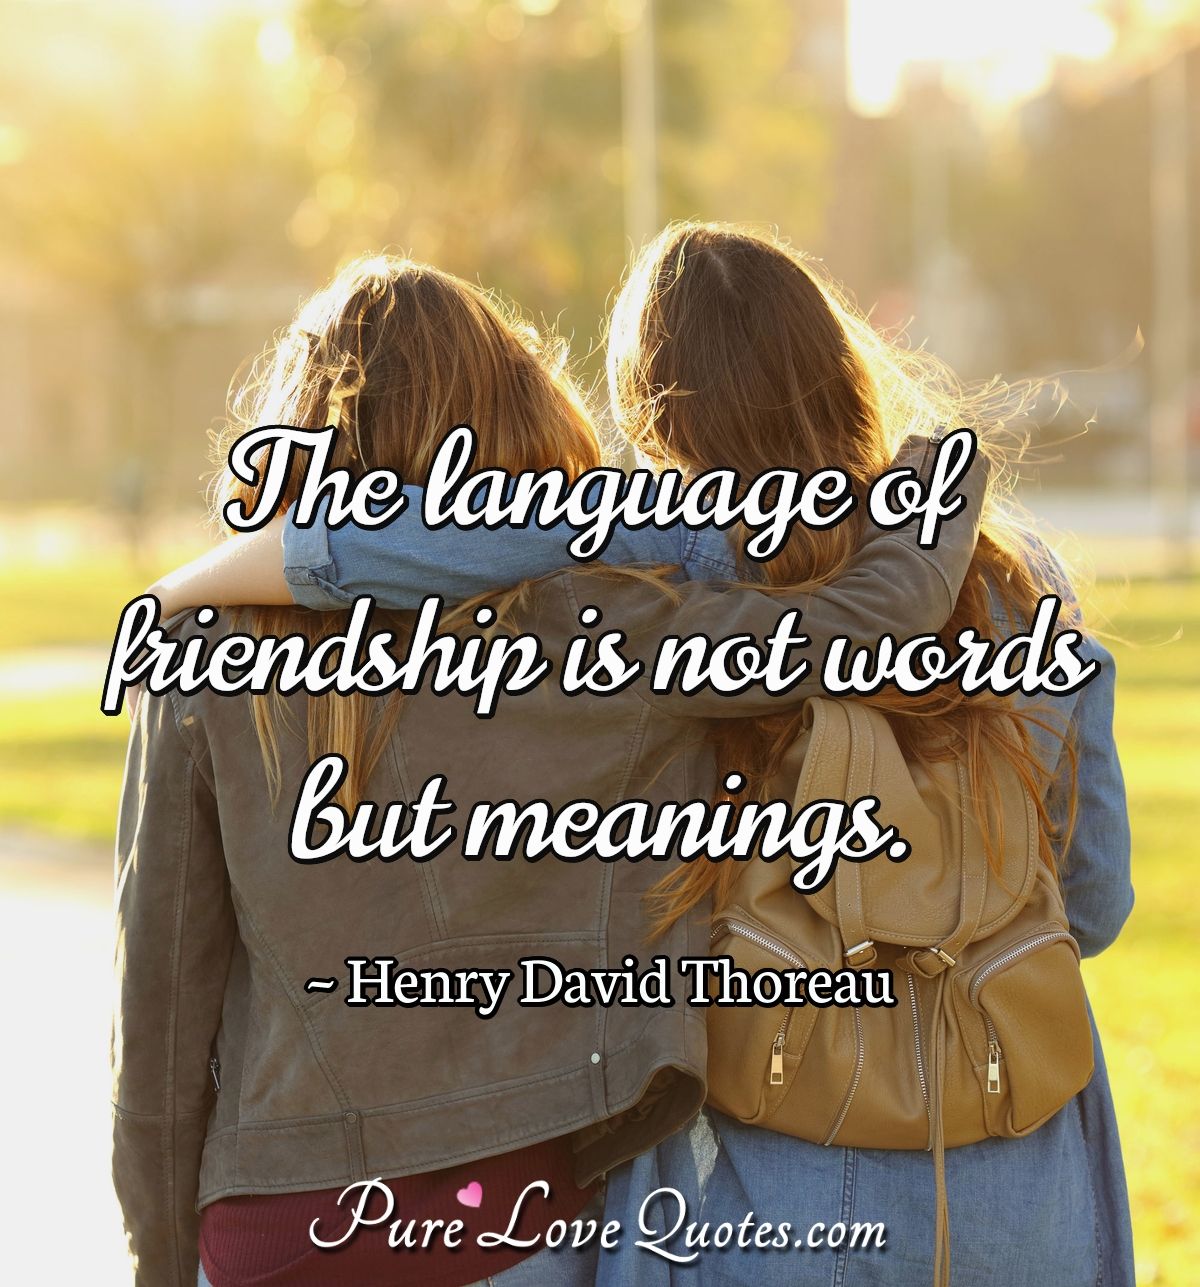 The language of friendship is not words but meanings. - Henry David Thoreau